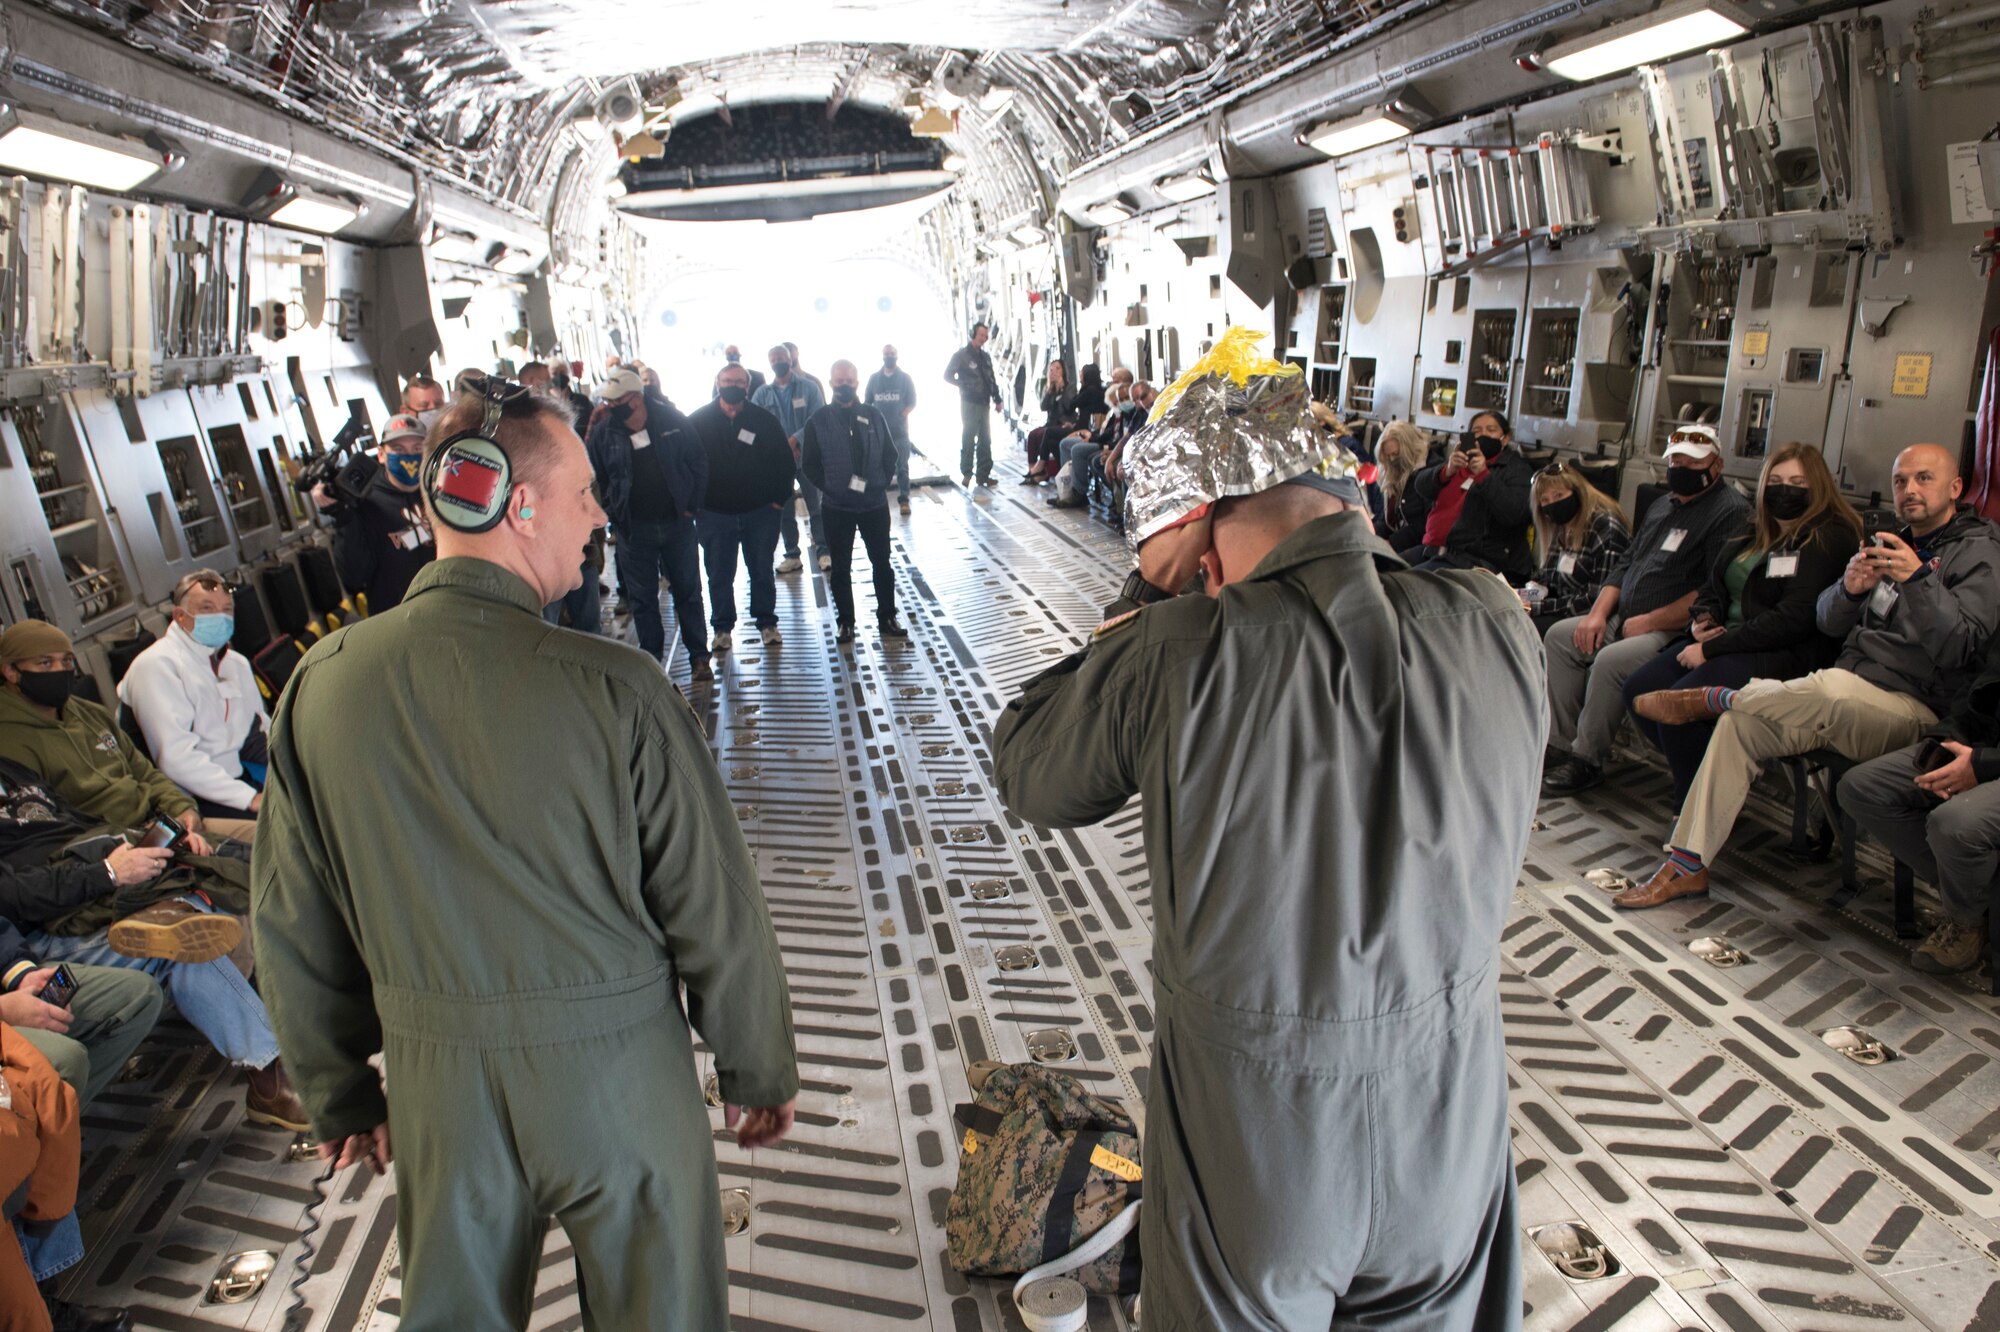 U.S. Air Force Senior Master Sgt. John Ratcliffe and Tech. Sgt. Mark Darlington, loadmaster for the 167th Operations Group, brief emergency procedures to passengers on a C-17 Globemaster III aircraft, Shepherd Field, Martinsburg, West Virginia, Nov. 9, 2021. Nearly 50 employers flew on the C-17 as part of the Employer Support of the Guard and Reserve Bosslift event at the unit.